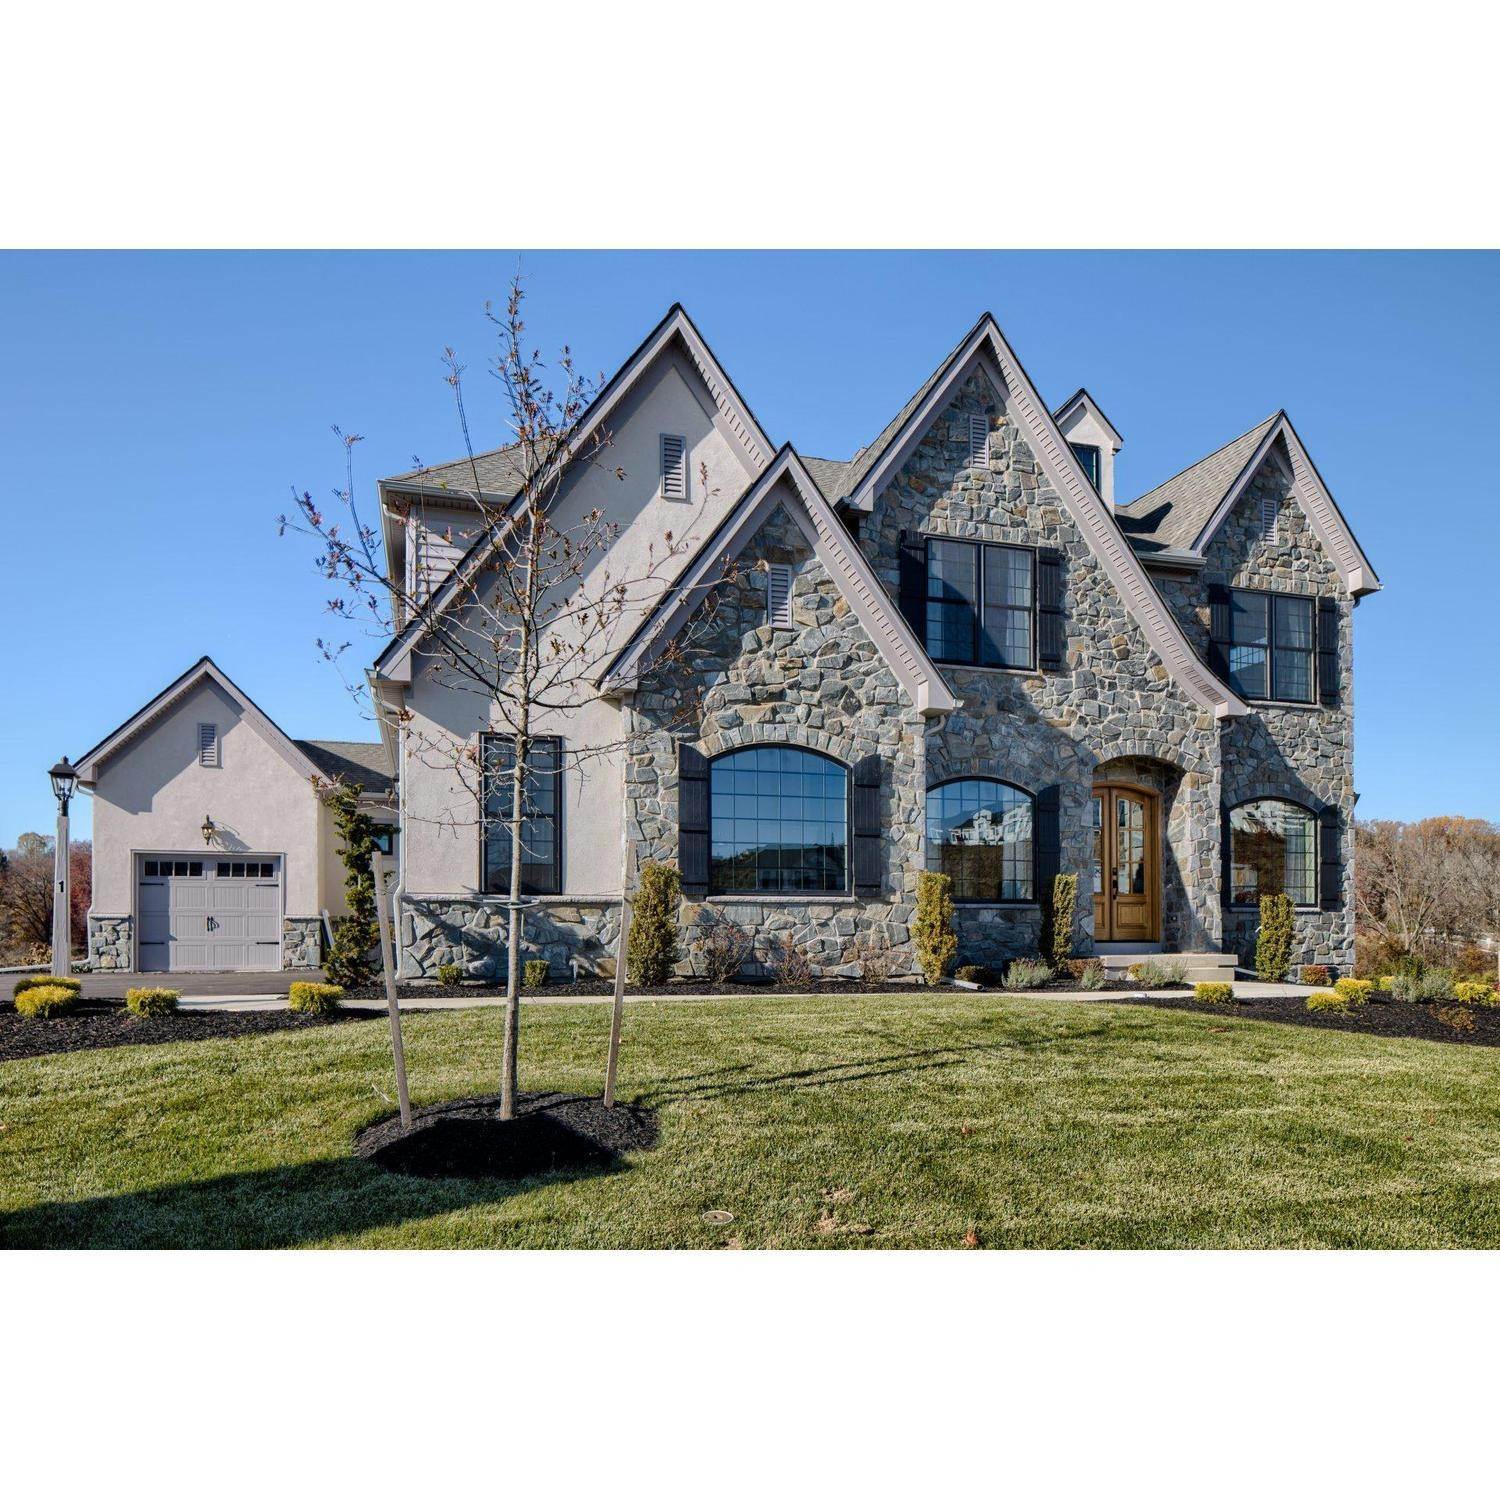 50. 101 Parkview Way, Newtown Square, PA 19073에 Ventry at Edgmont Preserve 건물